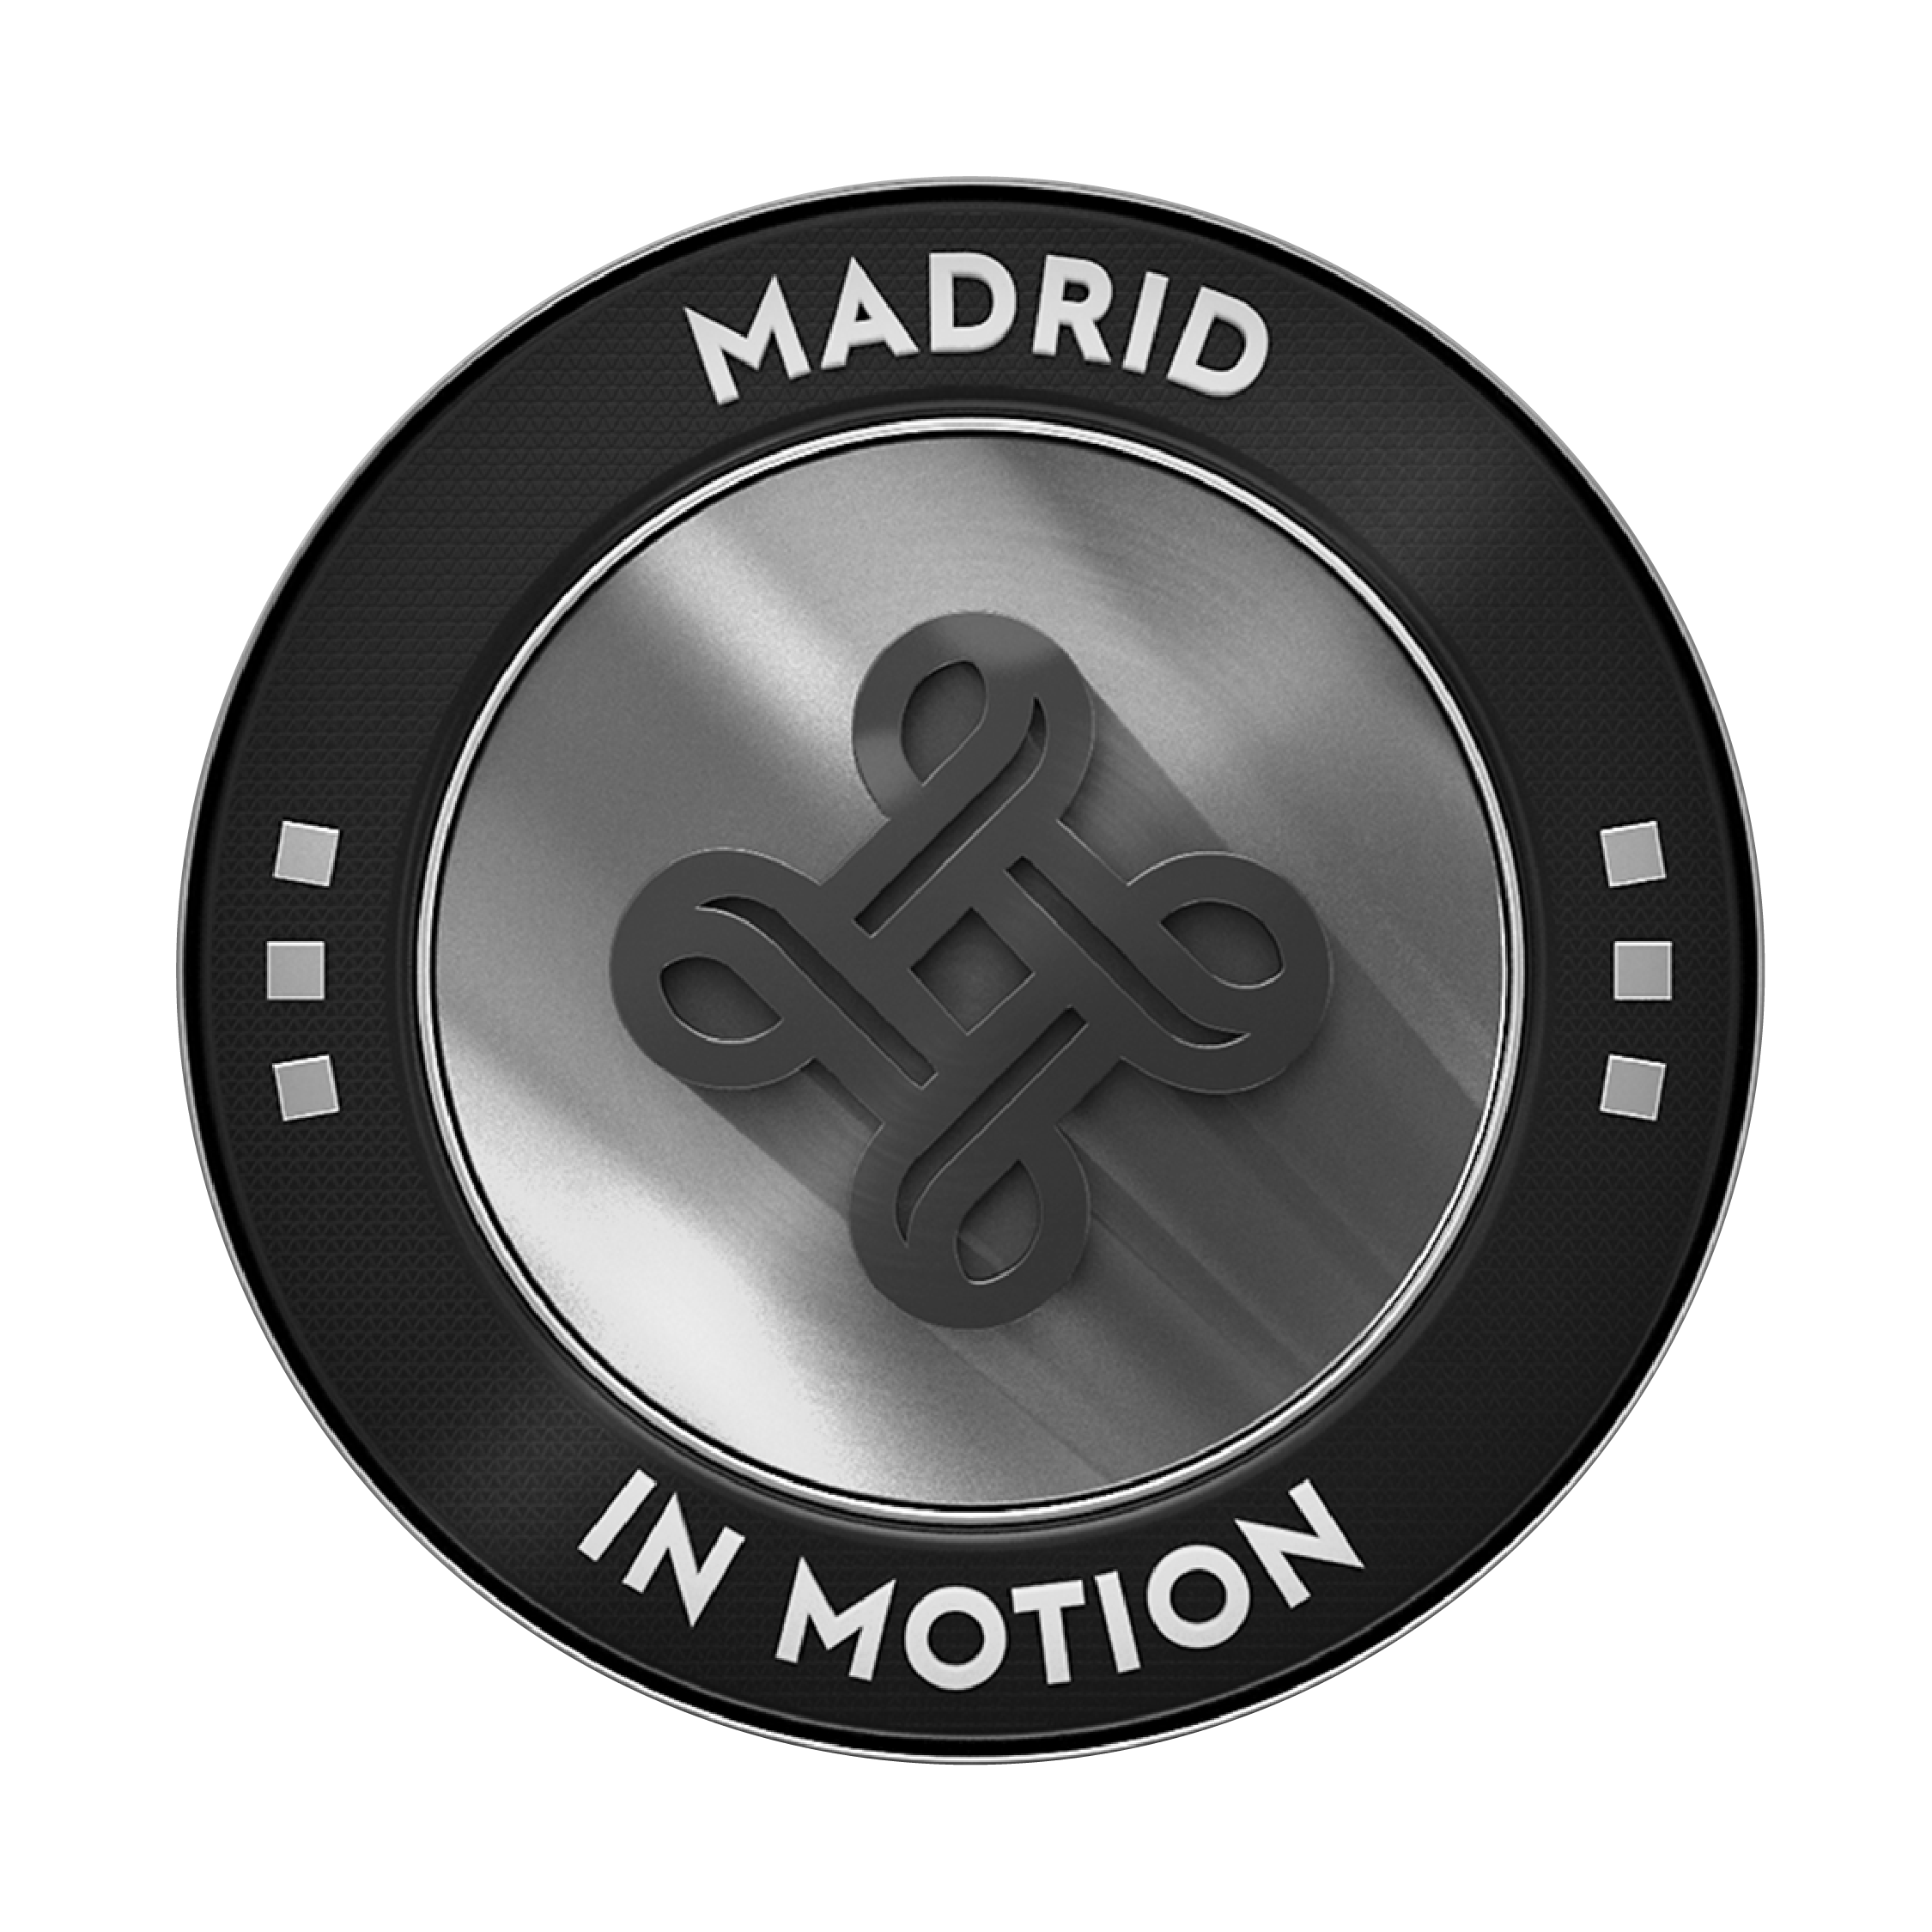 MADRID IN MOTION 24